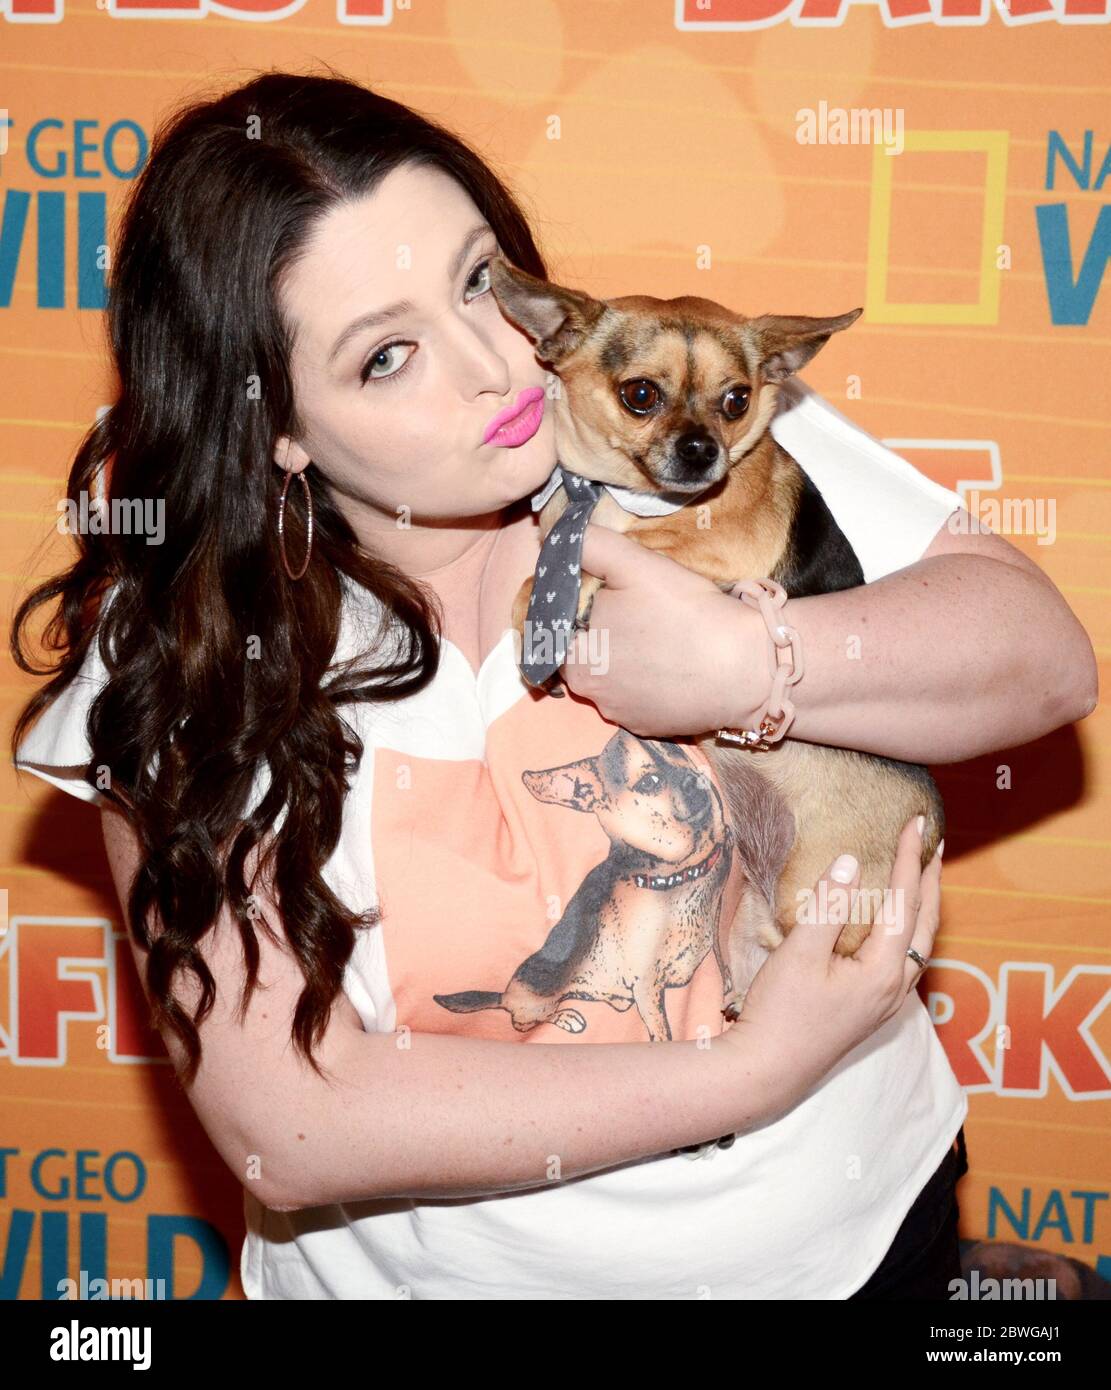 April 9, 2016: Lauren Ash attends Nat Geo WILD 2nd Annual Barkfest at Palihouse Hotel on April 9, 2016 in West Hollywood, California. (Credit Image: © Billy Bennight/ZUMA Wire) Stock Photo